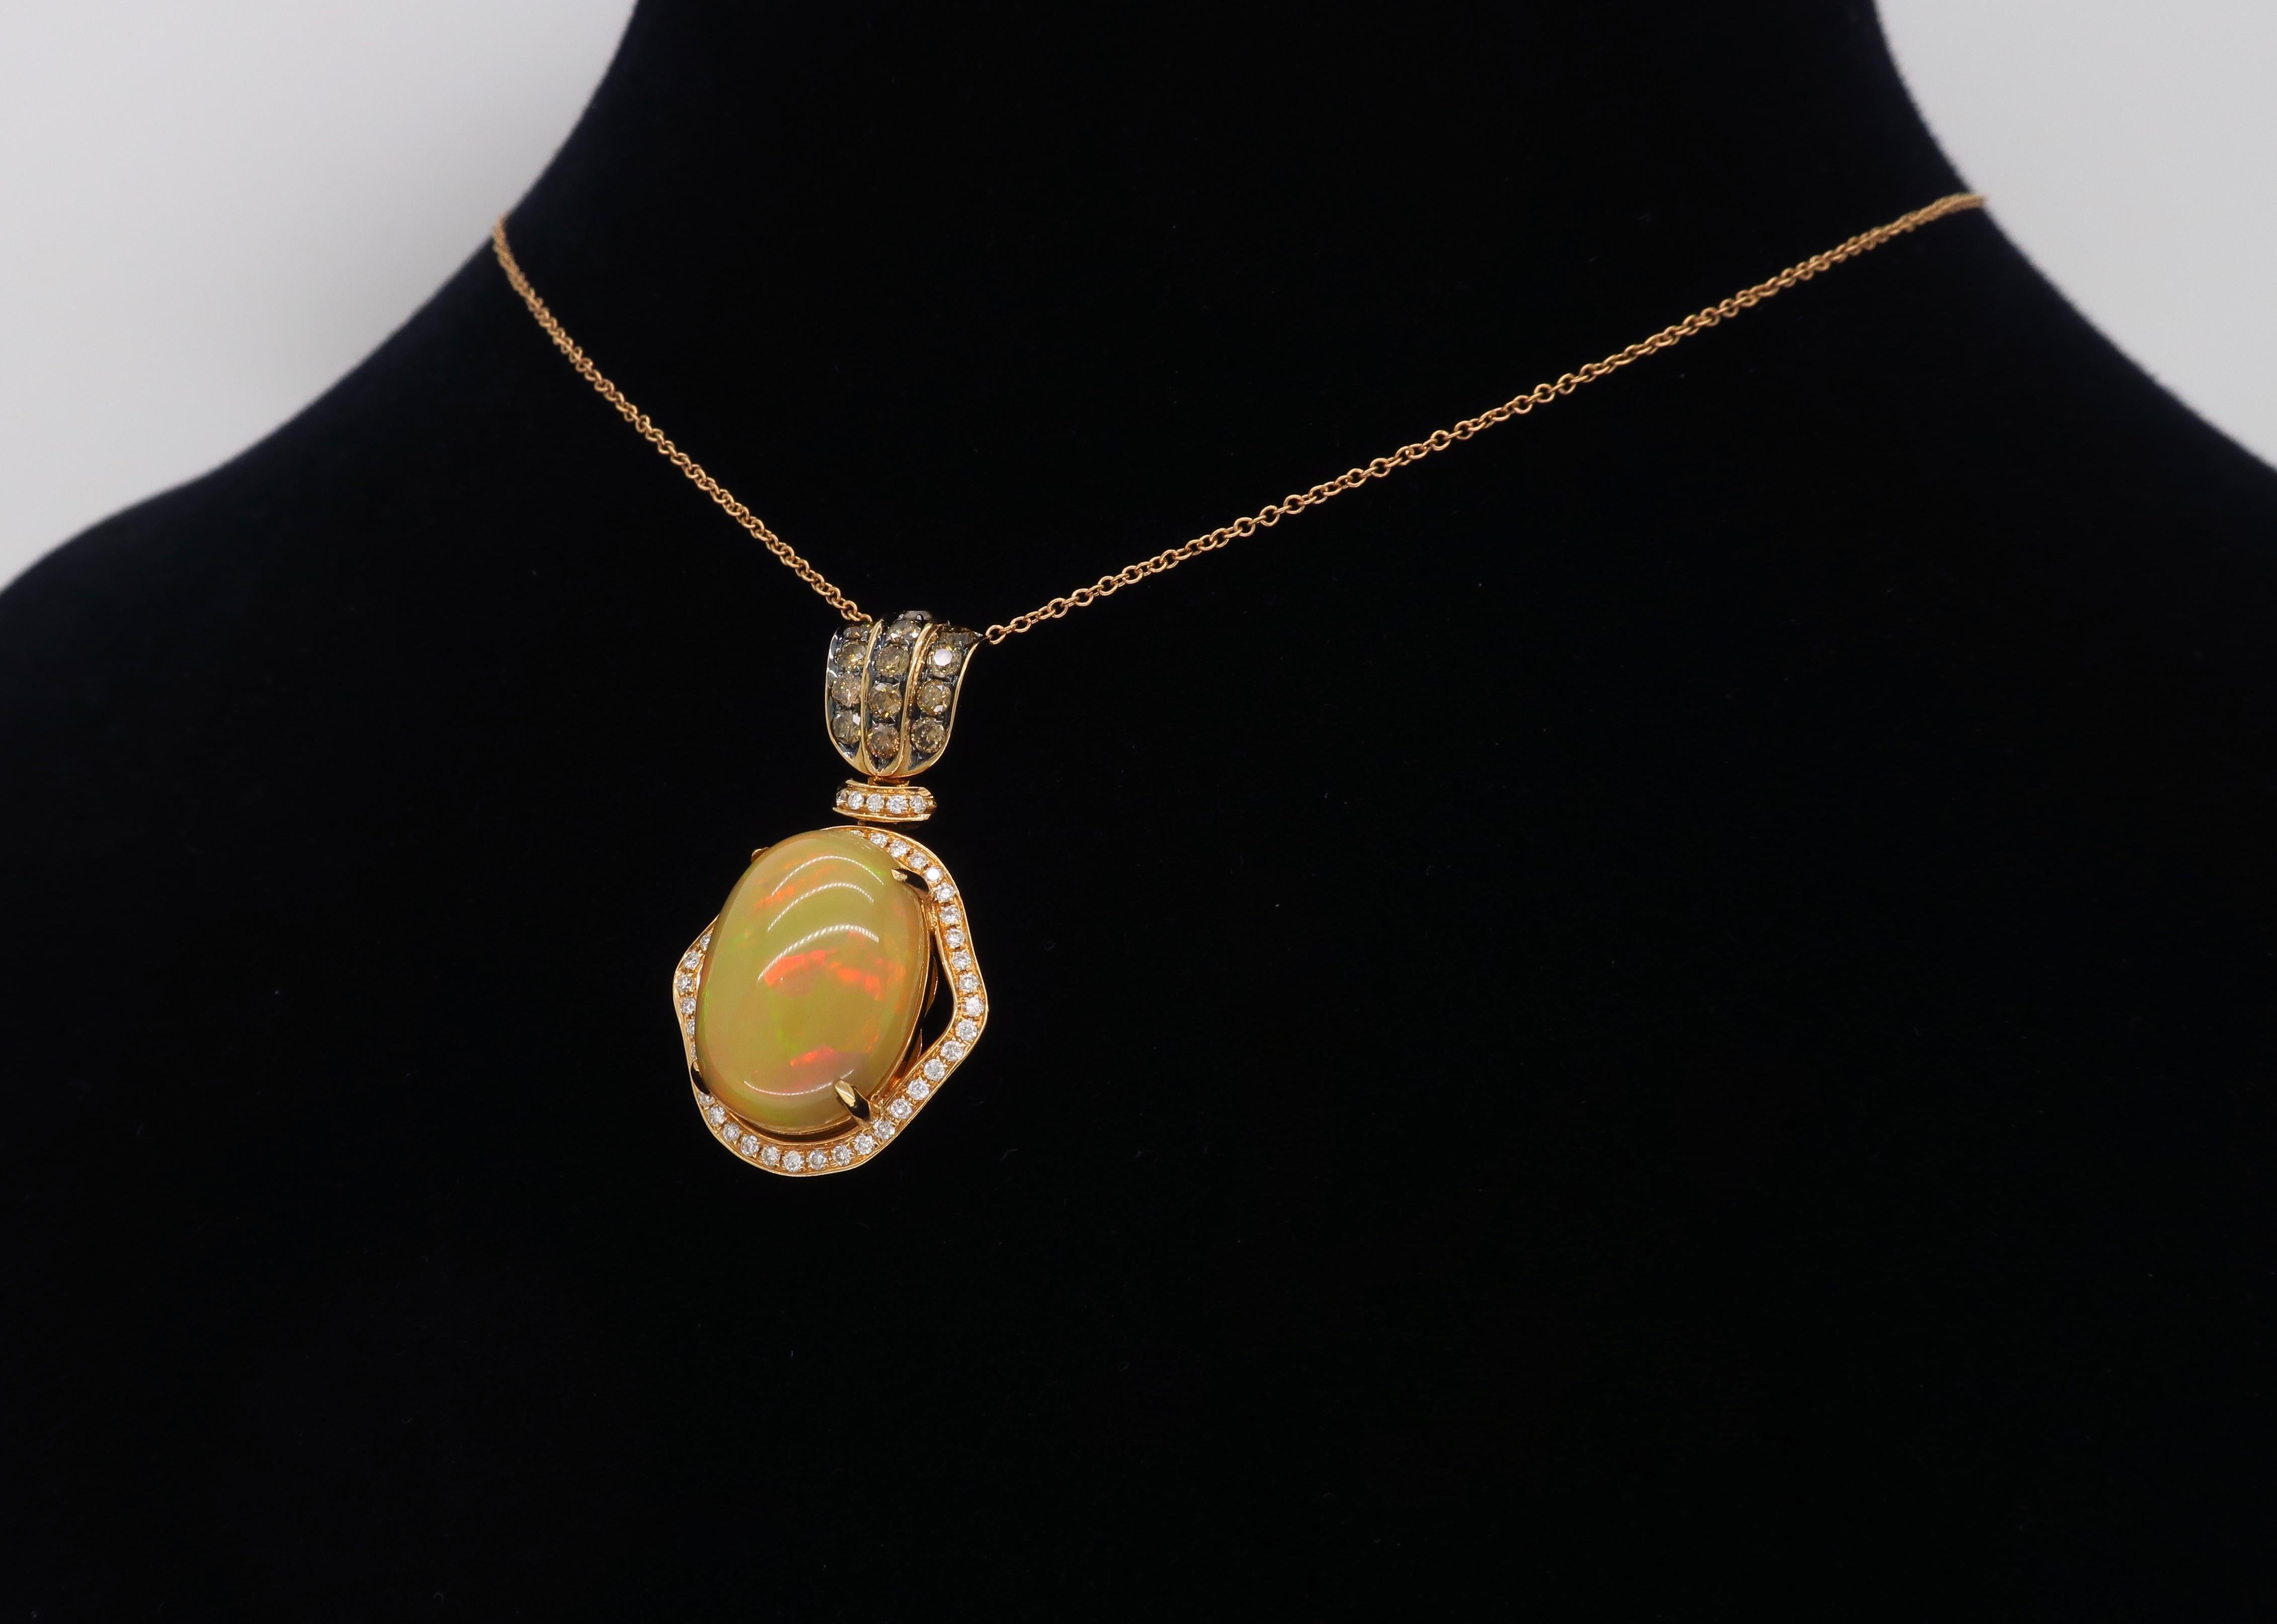 Custom Le Vian Opal and Diamond Pendant crafted in 18k gold. 

Designer: Le Vian
Gemstone: Neopolitan Opal 
Gemstone Weight: Approximately 5.89CT
Diamond Carat Weight: Approximately .75CTW
Diamond Cut: Round Brilliant; Average G-J Color and 13 Brown